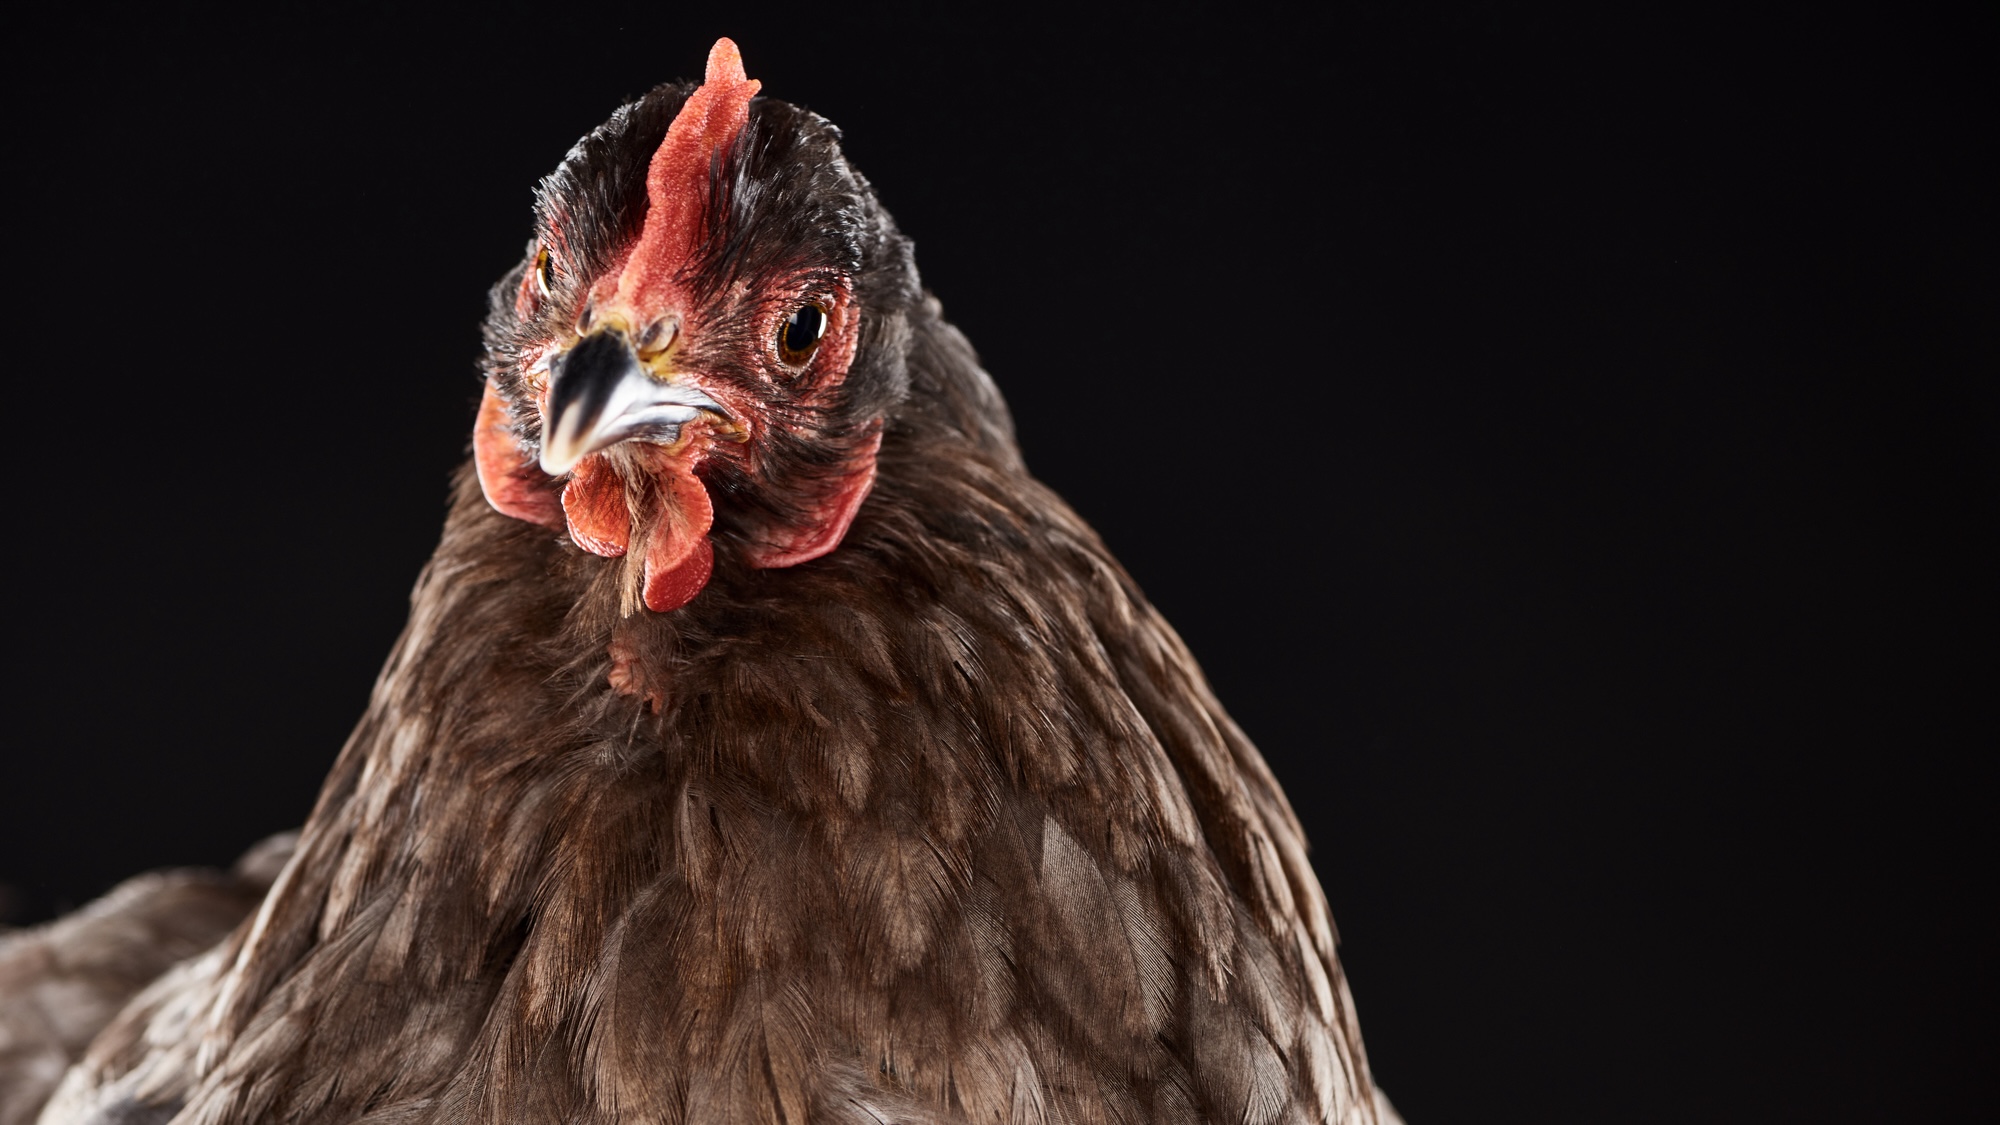 Chicken fat supercapacitors could store green energy of the future thumbnail